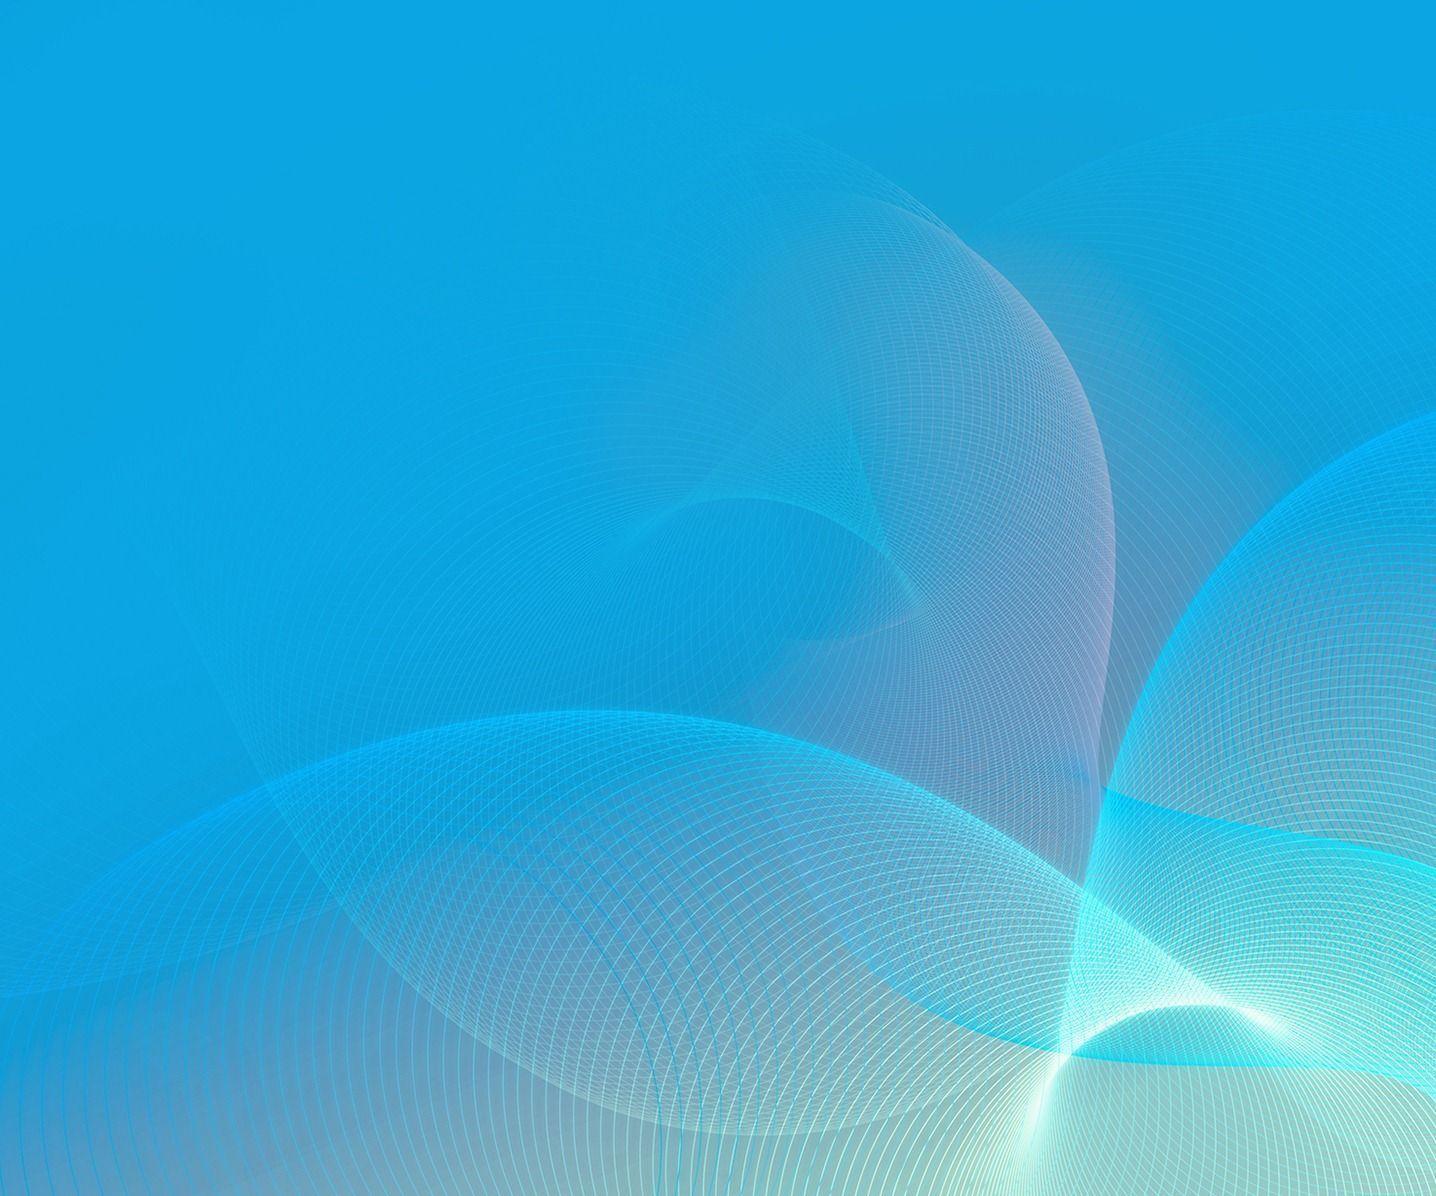 Official Wallpapers from Nexus 4 Android 4.2